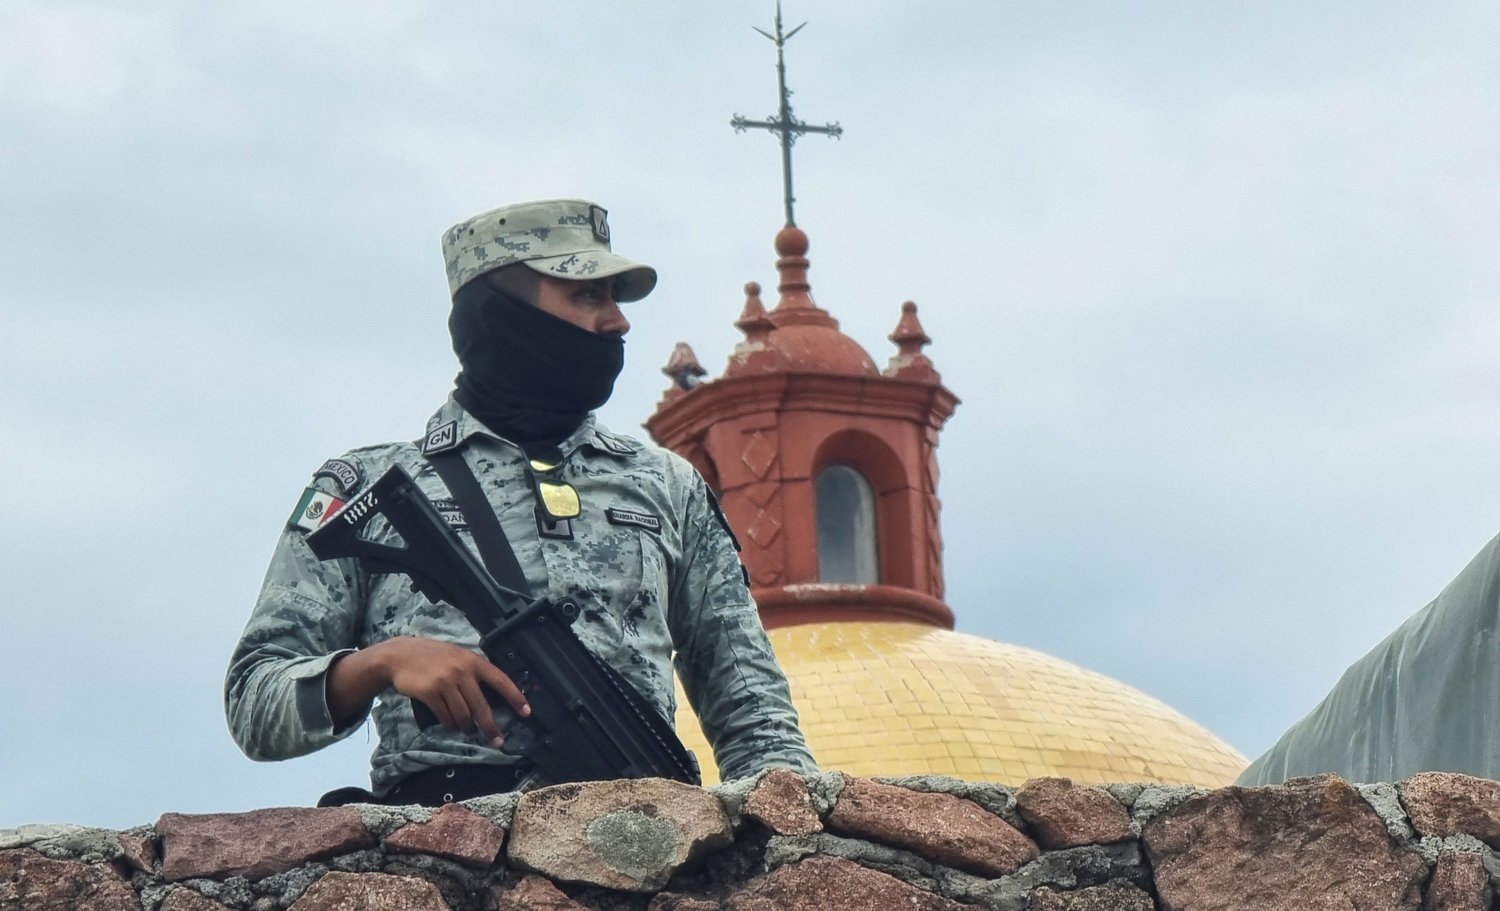 A member of the Mexican army stands guard outside a church in the parish community of Cerocahui June 22. Jesuit Fathers Javier Campos Morales and Joaquín César Mora Salazar were murdered at the parish June 20 as they offered refuge to a tour guide seeking protection.